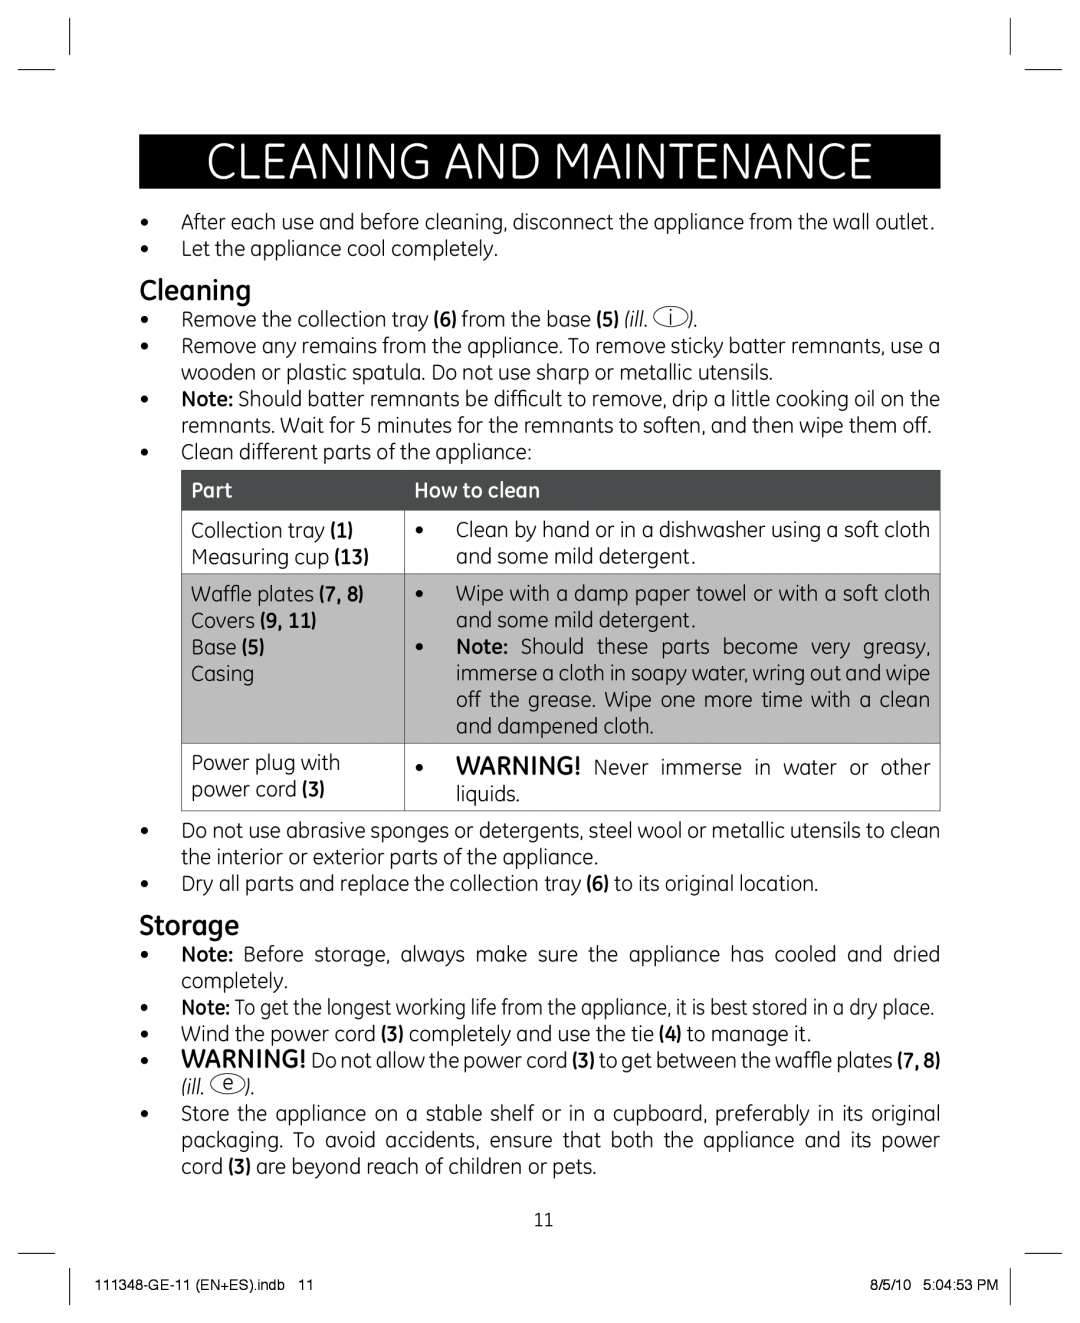 GE 898678 manual Cleaning and maintenance, Storage, Part, How to clean 